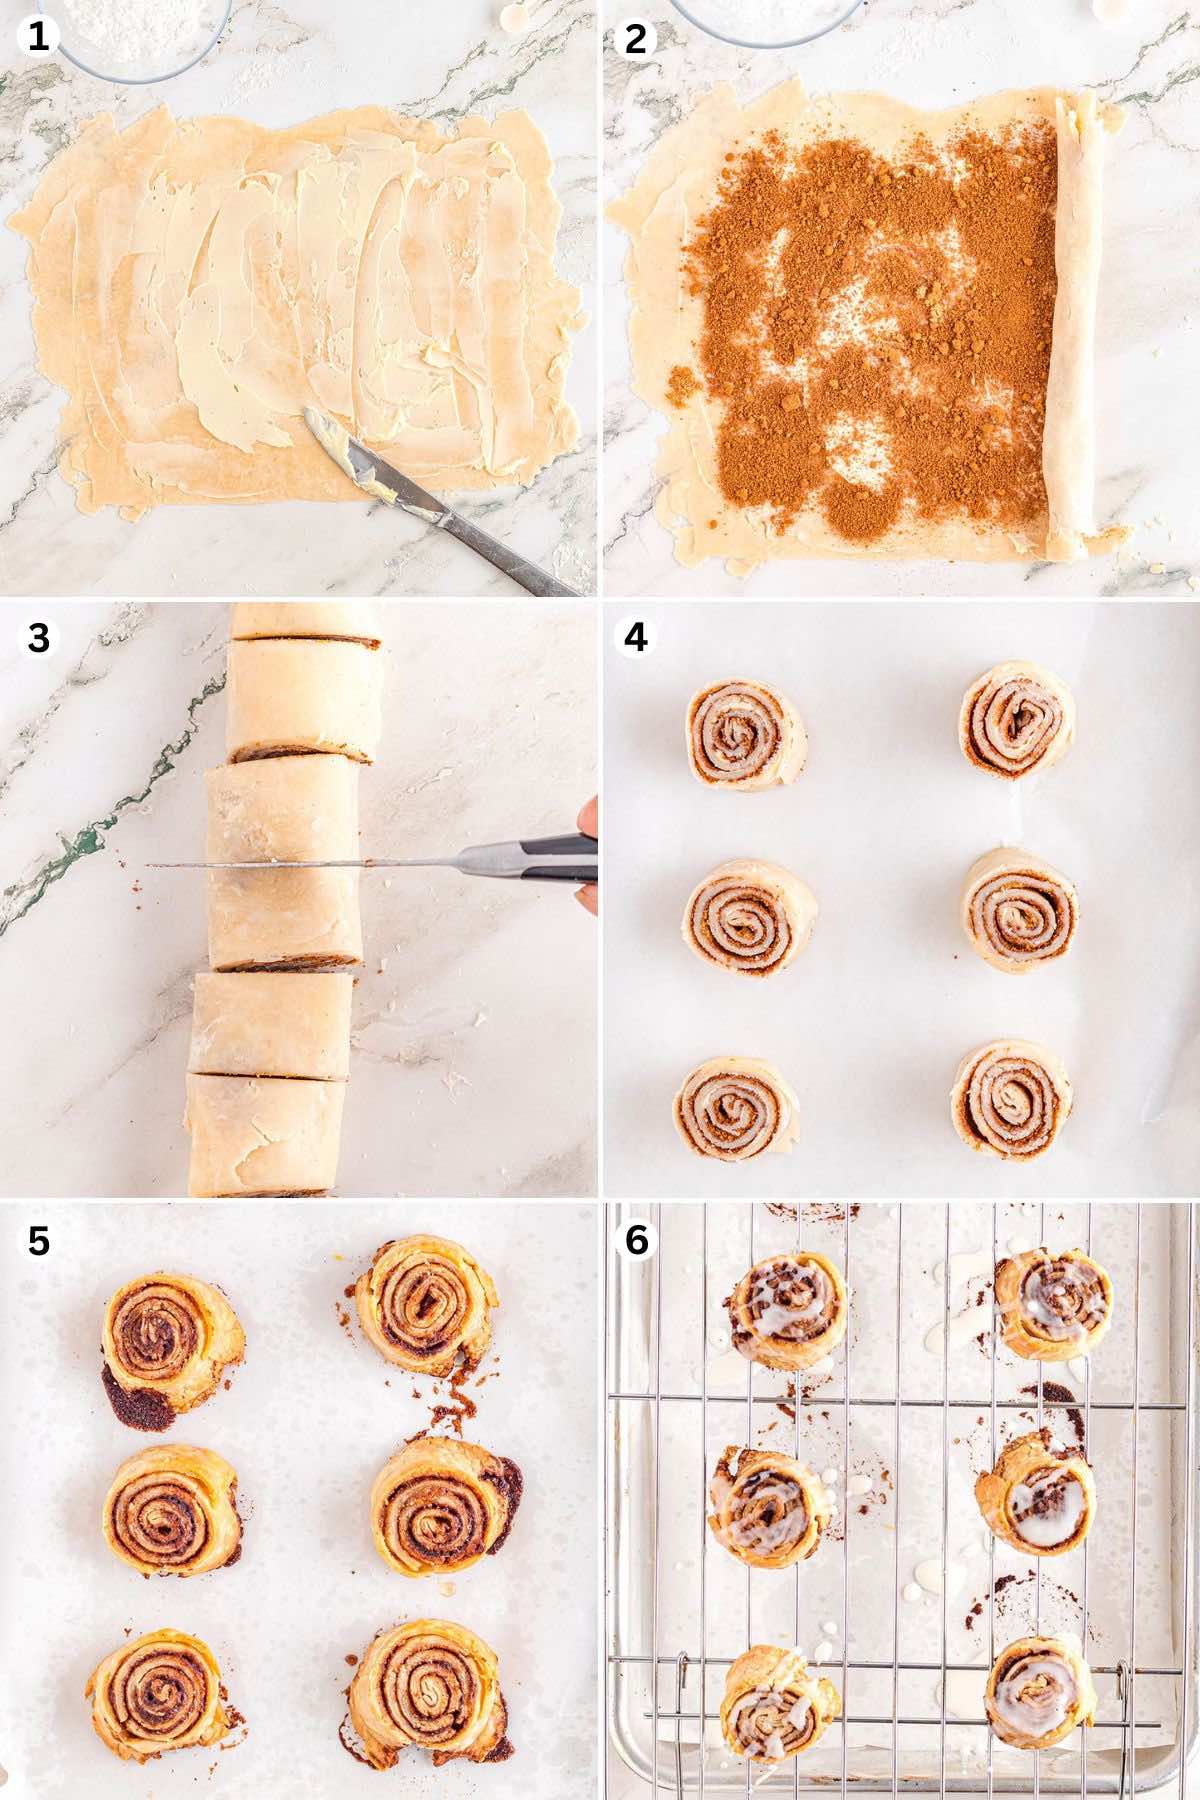 roll out the dough. spread butter and sprinkle with cinnamon and brown sugar. roll into logs. cut into pieces and lay in baking sheet. bake and drizzle with sugar glaze.